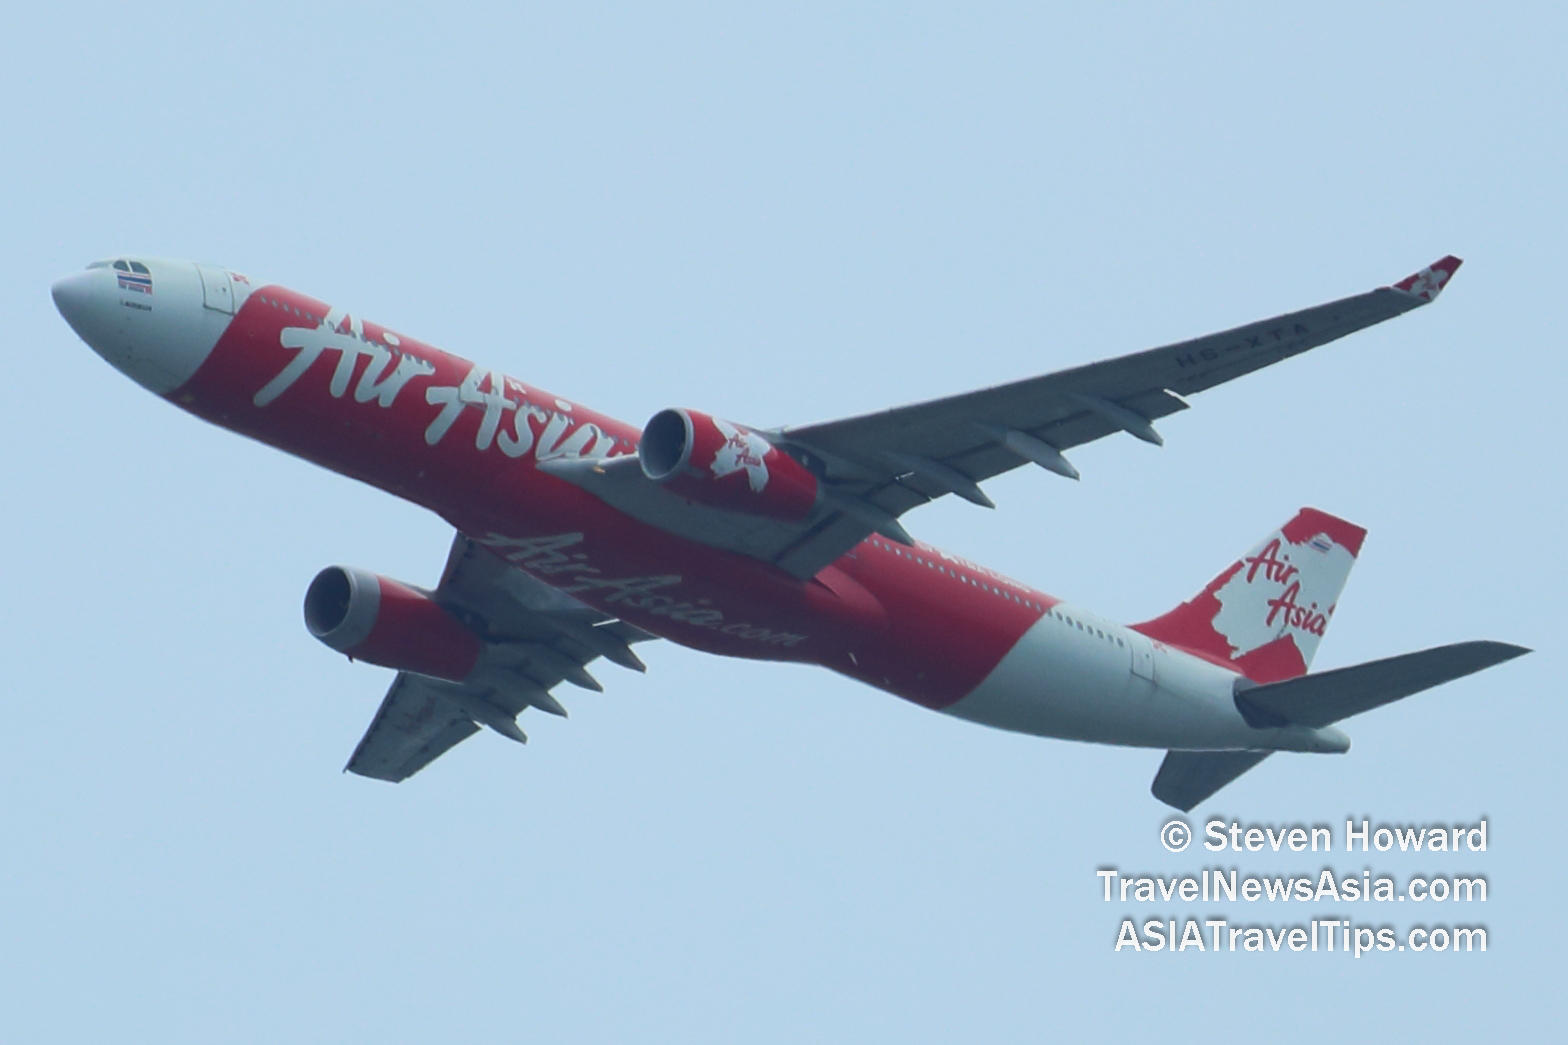 Thai AirAsia X Airbus A330 reg: HS-XTA. Picture by Steven Howard of TravelNewsAsia.com Click to enlarge.